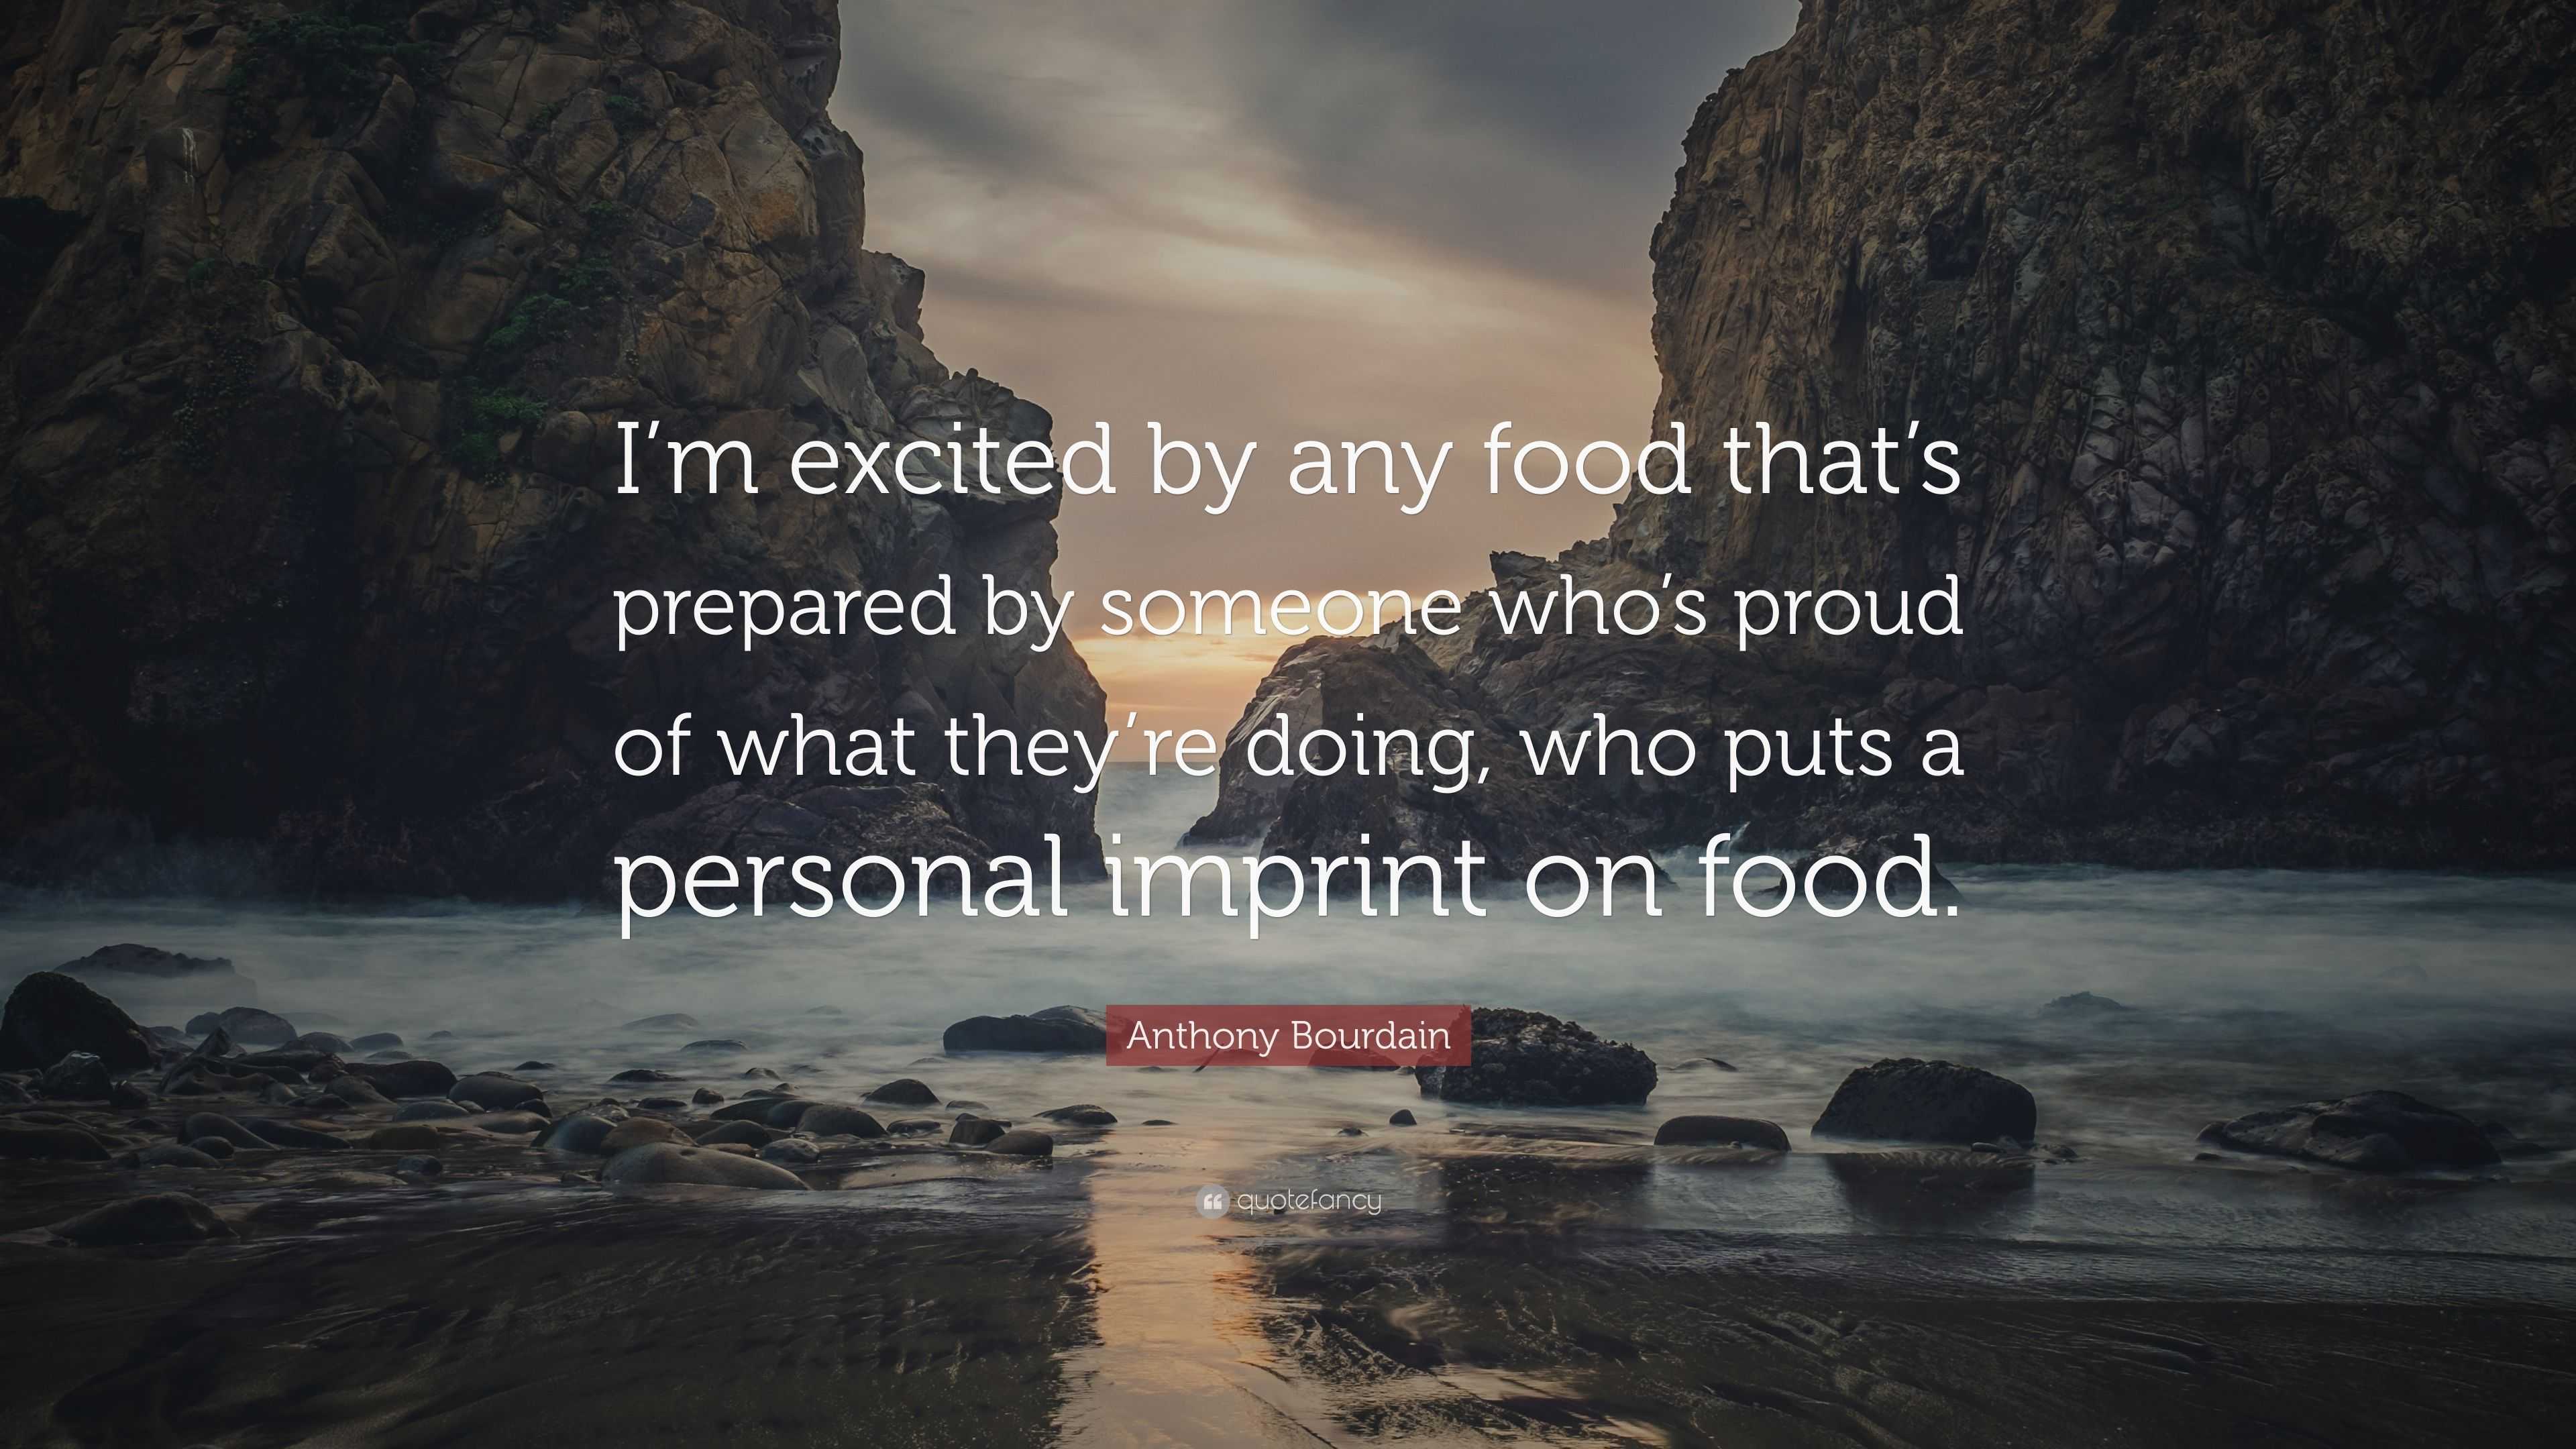 Anthony Bourdain Quote: “I’m excited by any food that’s prepared by